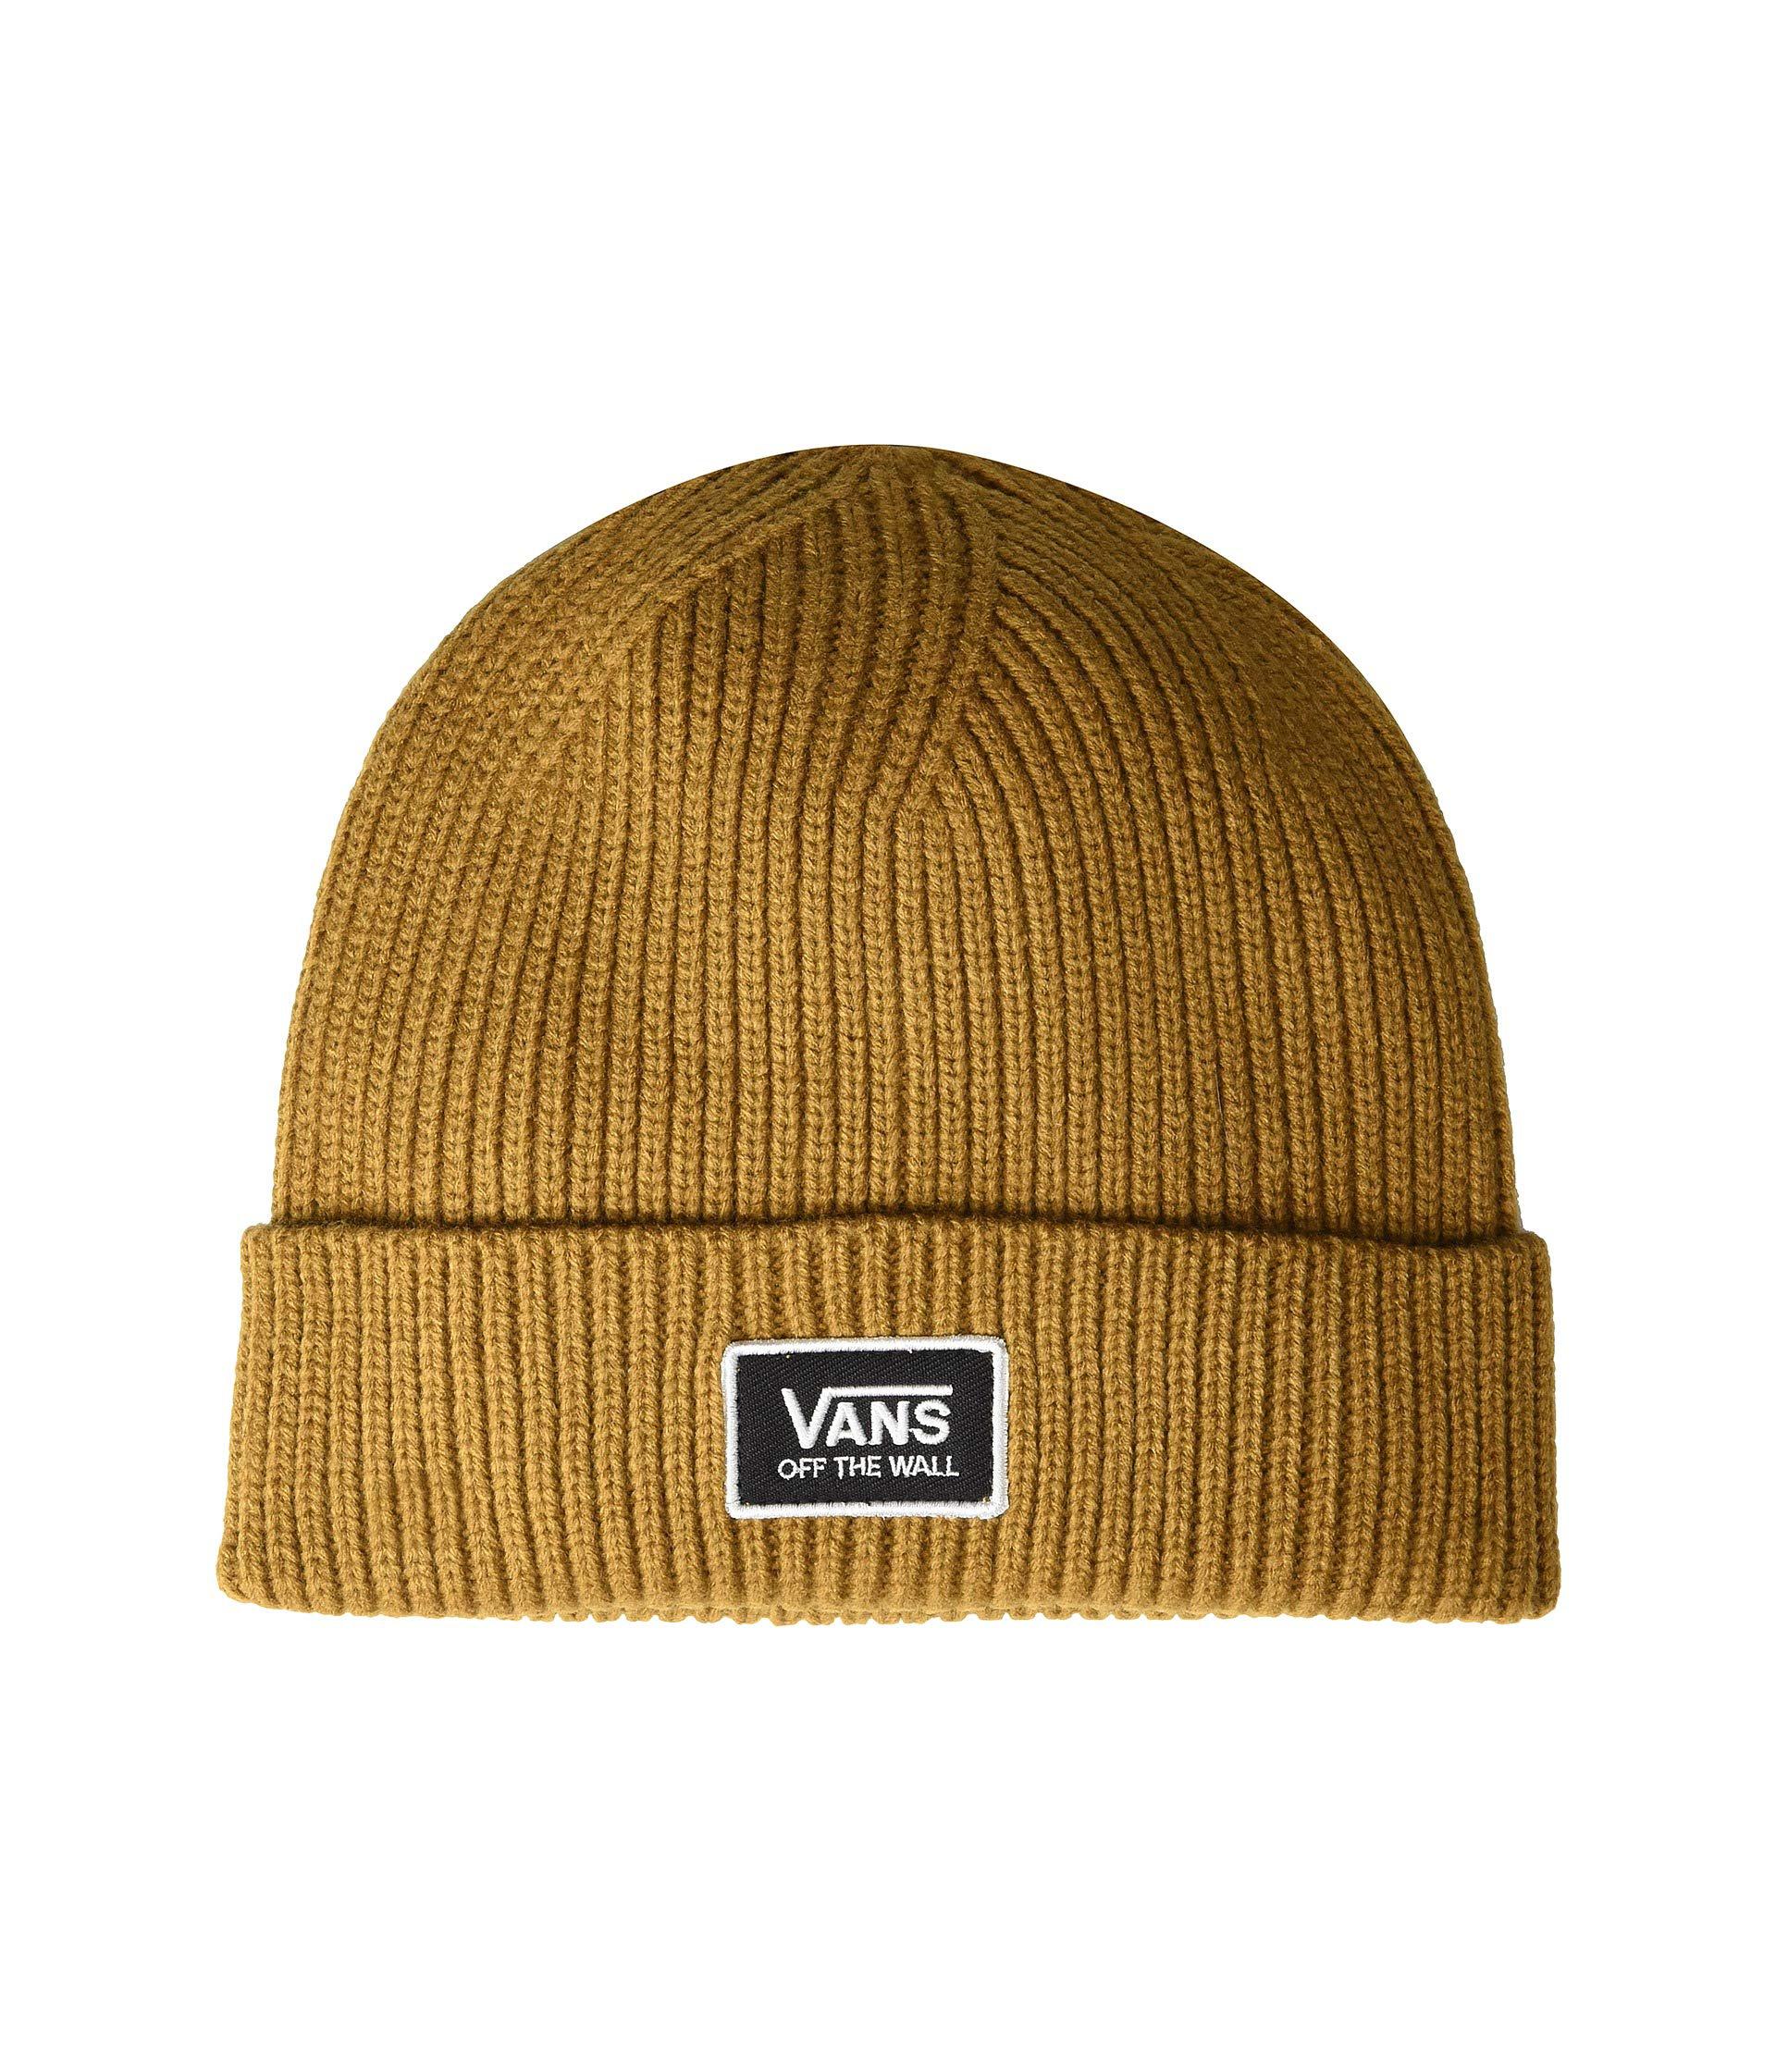 Ark Afgang Nybegynder Vans Synthetic Falcon Beanie (dusty Olive) Beanies - Lyst